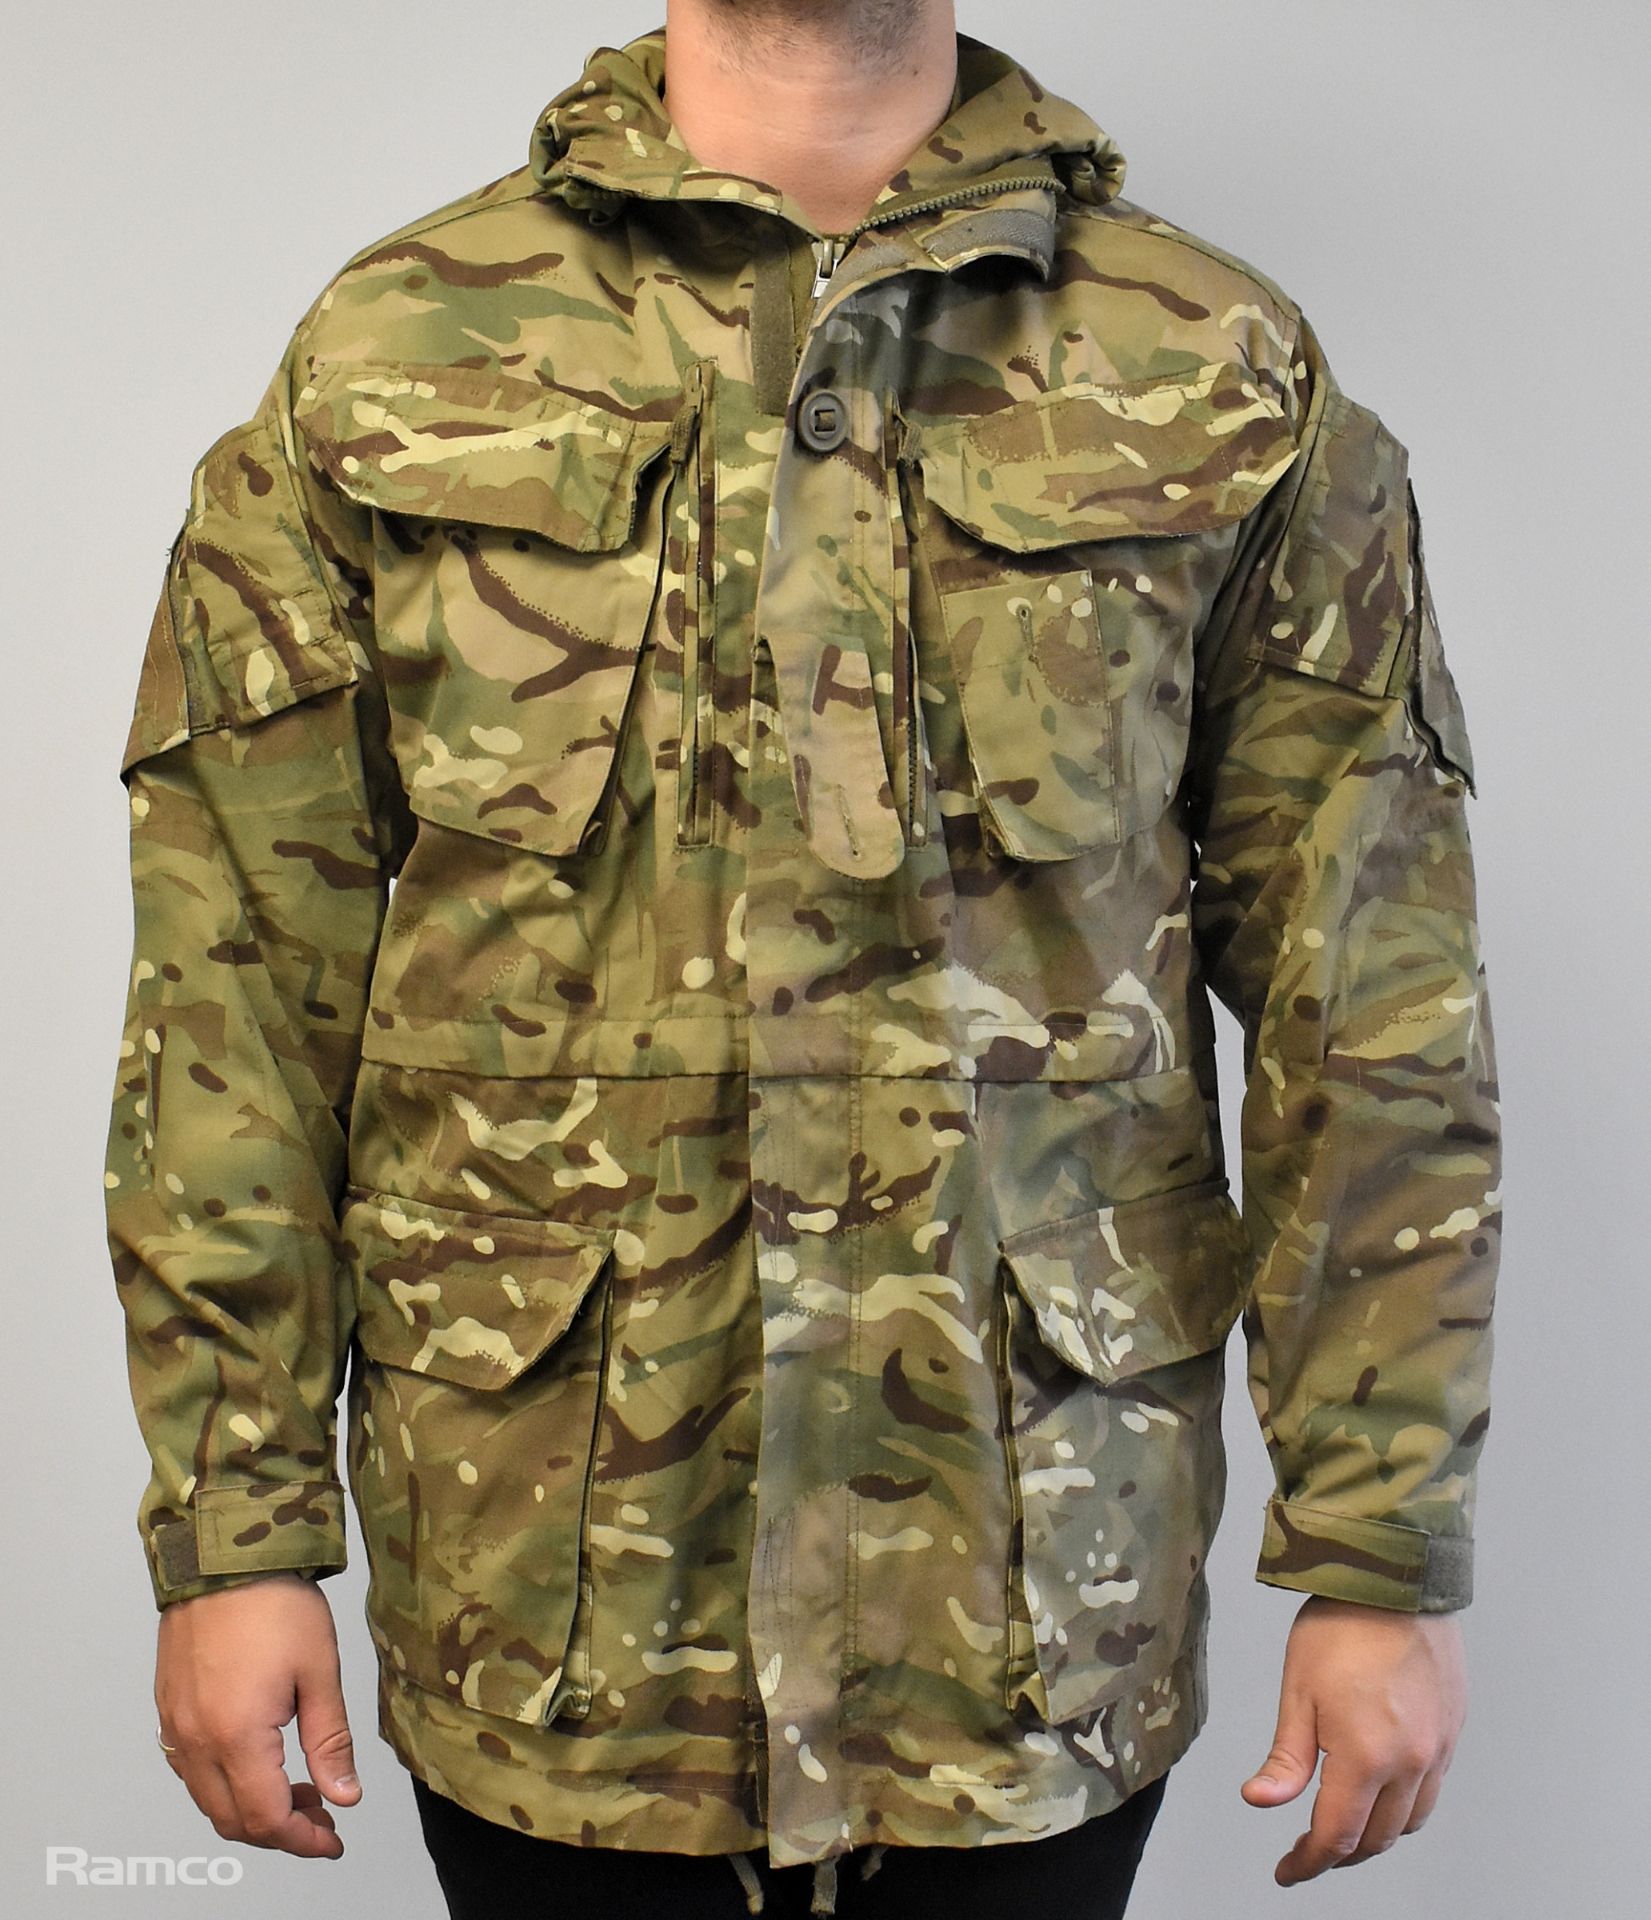 75x British Army MTP windproof smocks - mixed grades and sizes